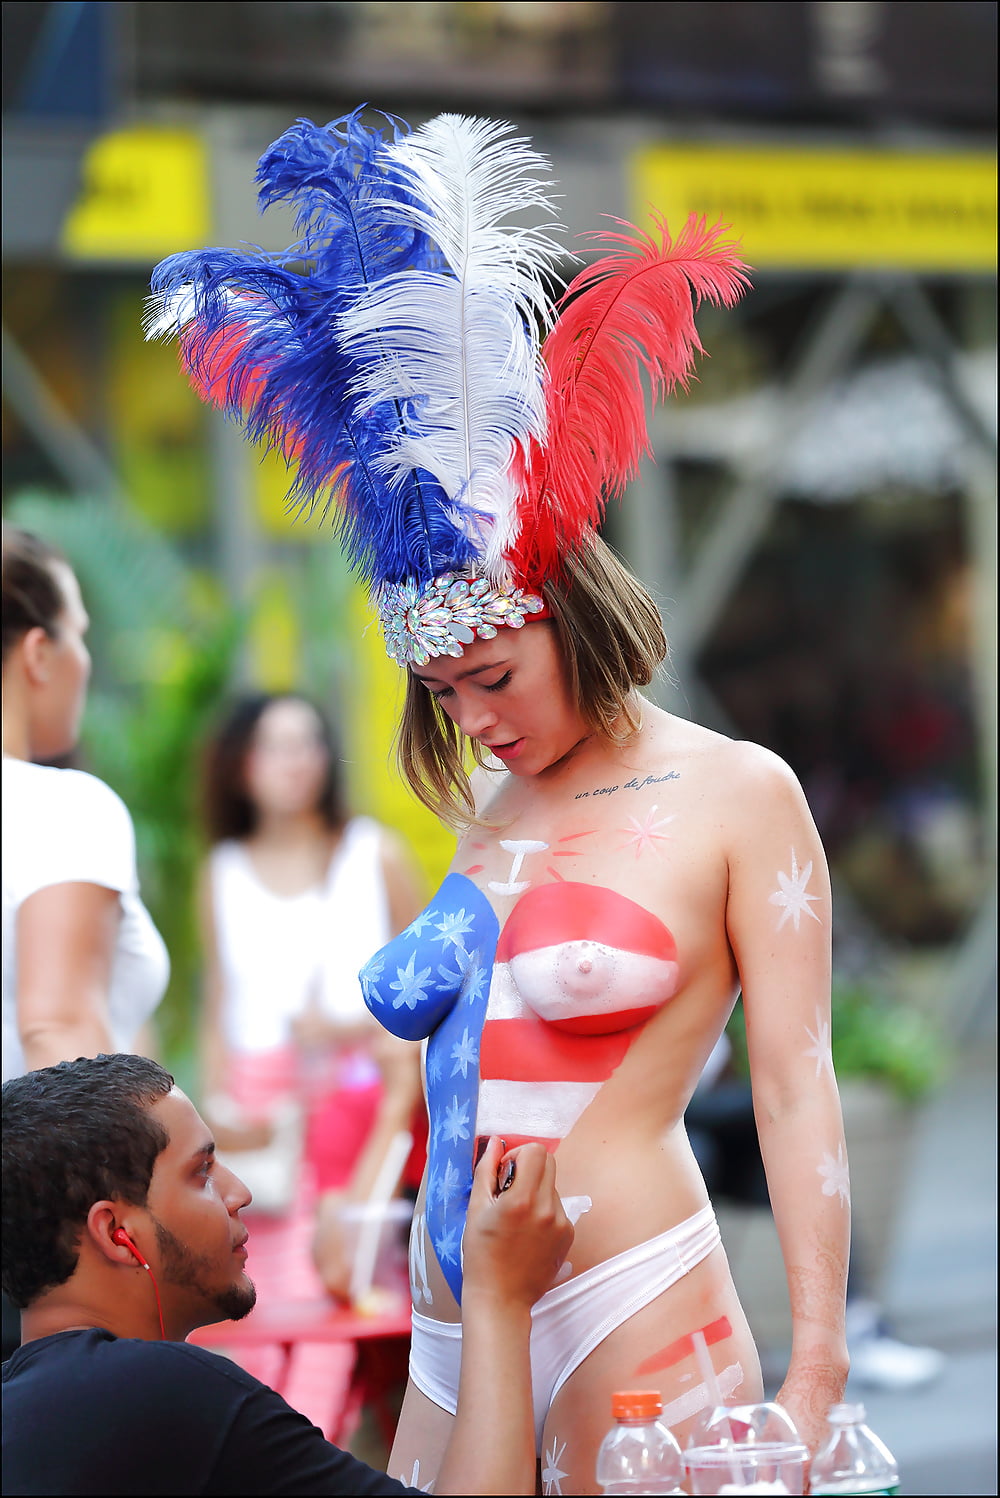 Topless bodypainted on Times Square - Photo #3.